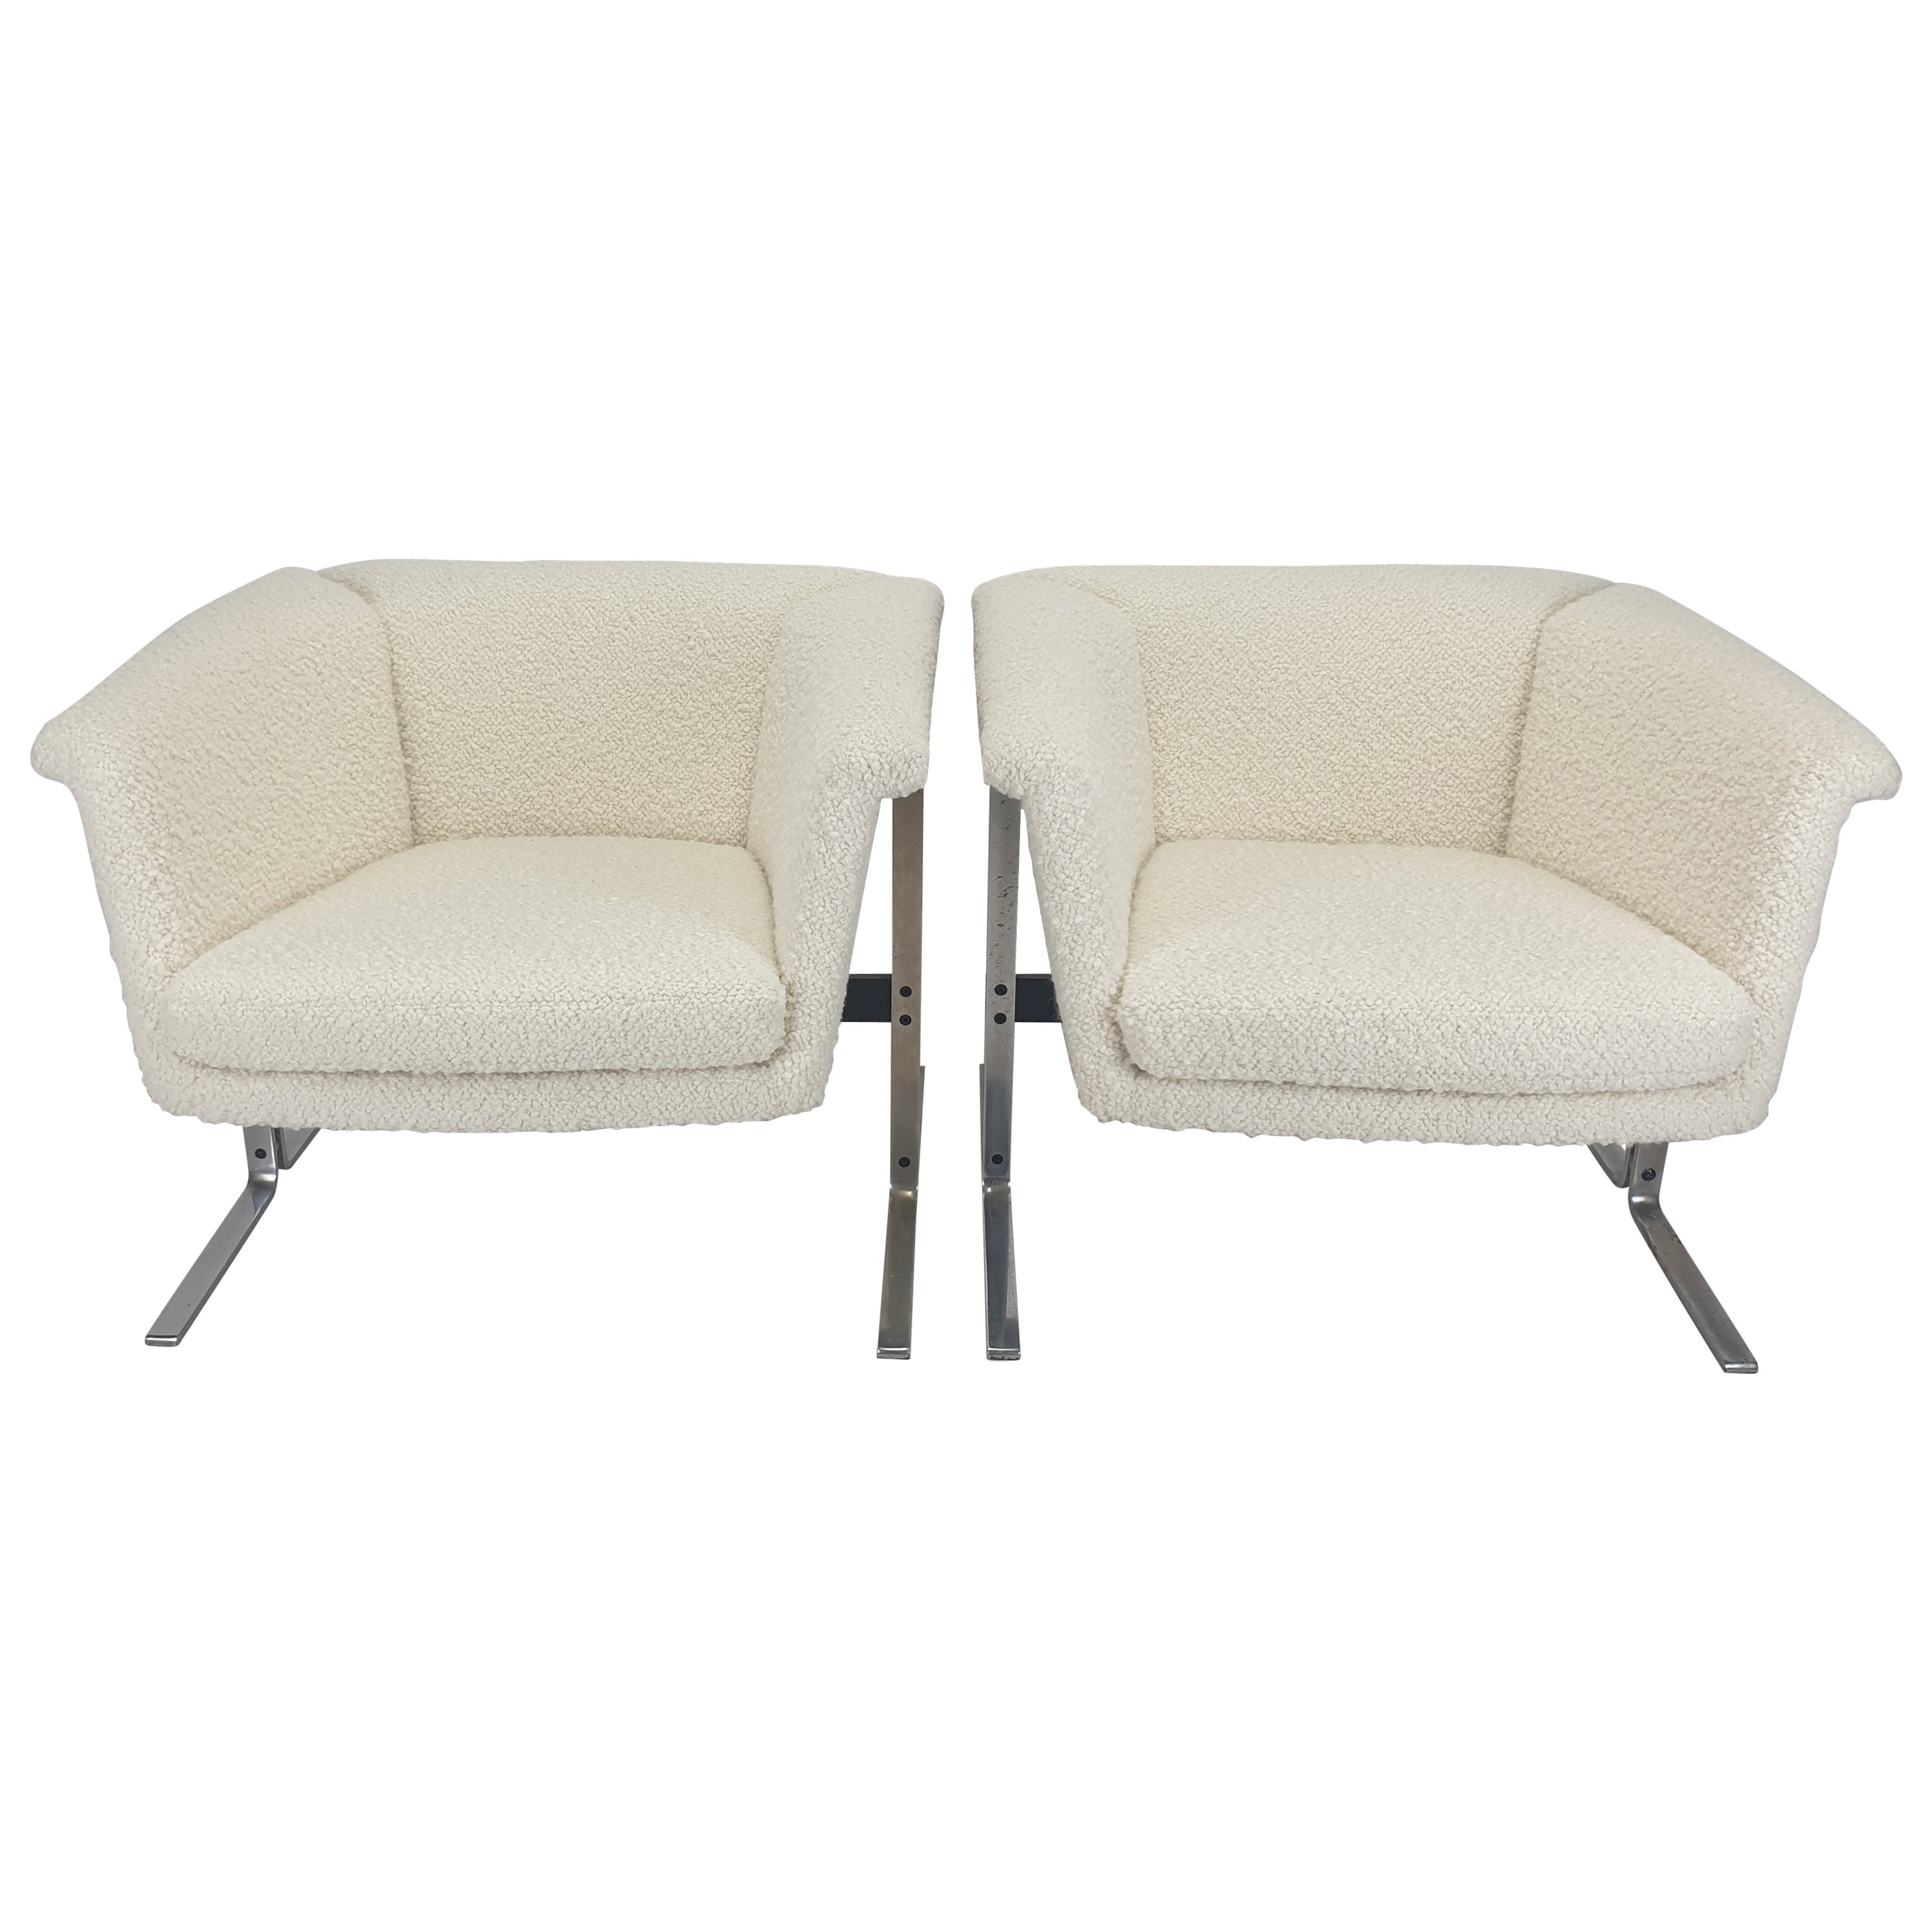 Set of 042 Lounge Chairs by Geoffrey Harcourt for Artifort, 1963